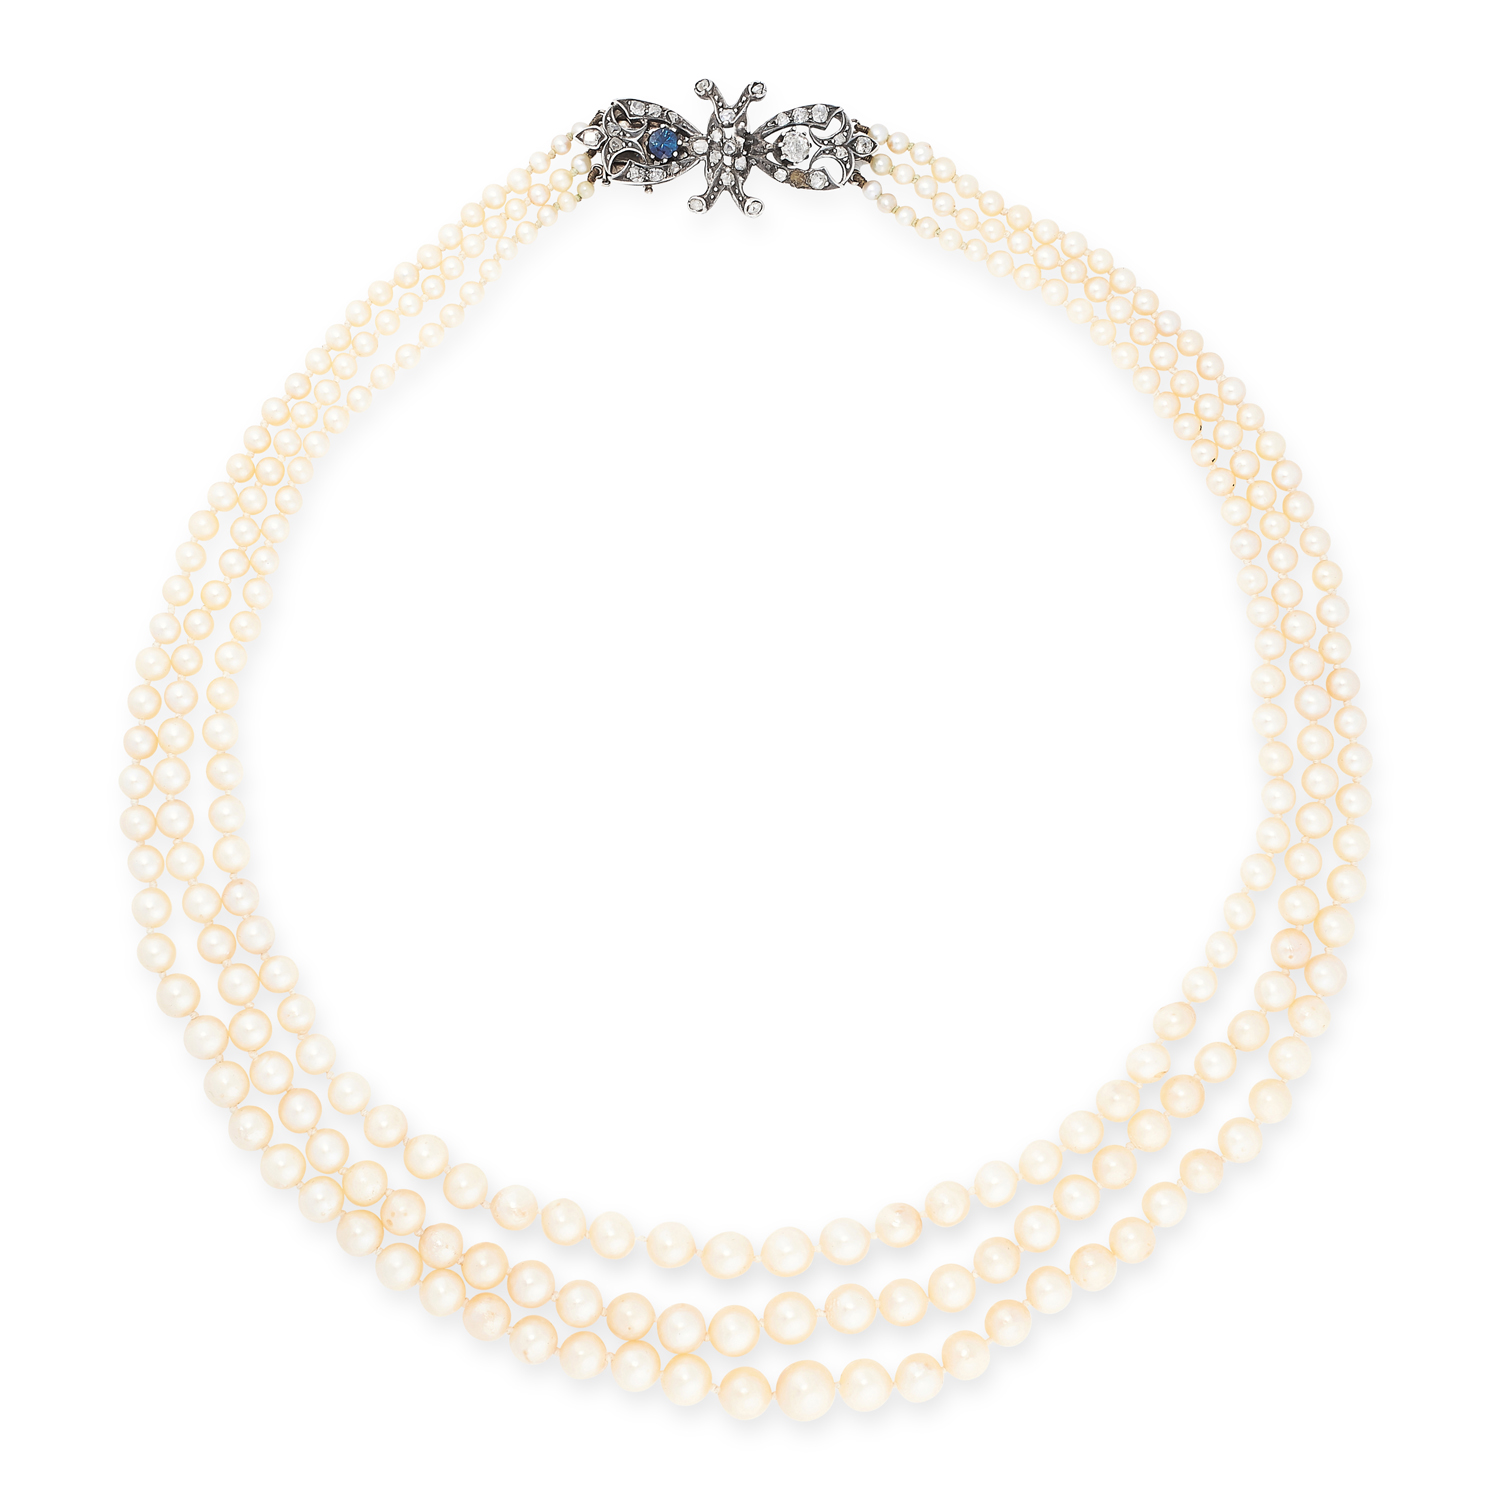 AN ANTIQUE PEARL, DIAMOND AND SAPPHIRE NECKLACE comprising of three rows of pearls ranging from 2.